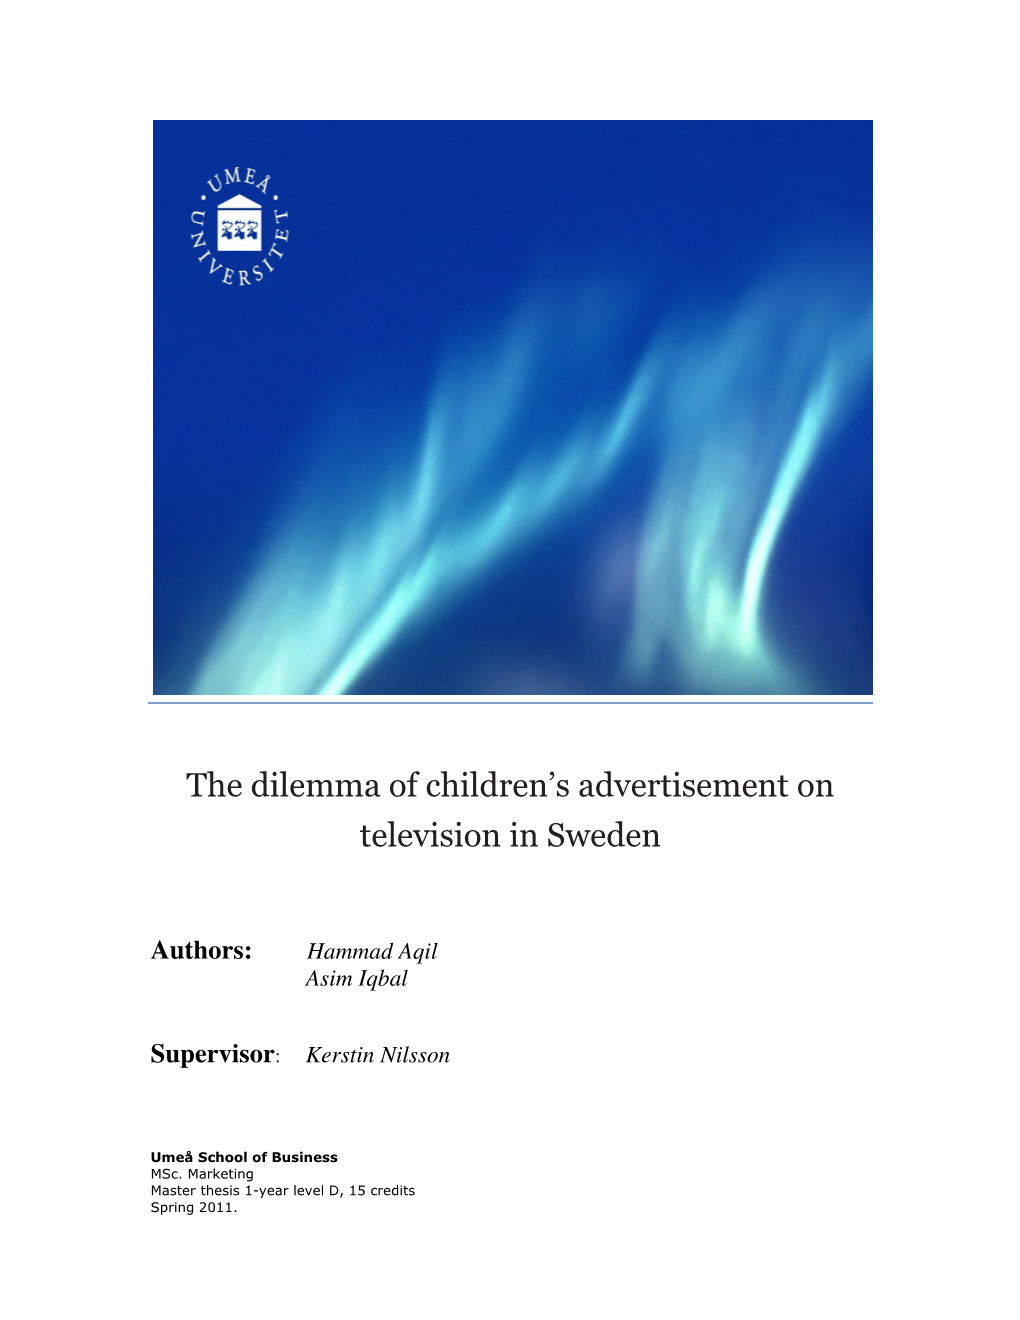 The Dilemma of Children's Advertisement on Television In